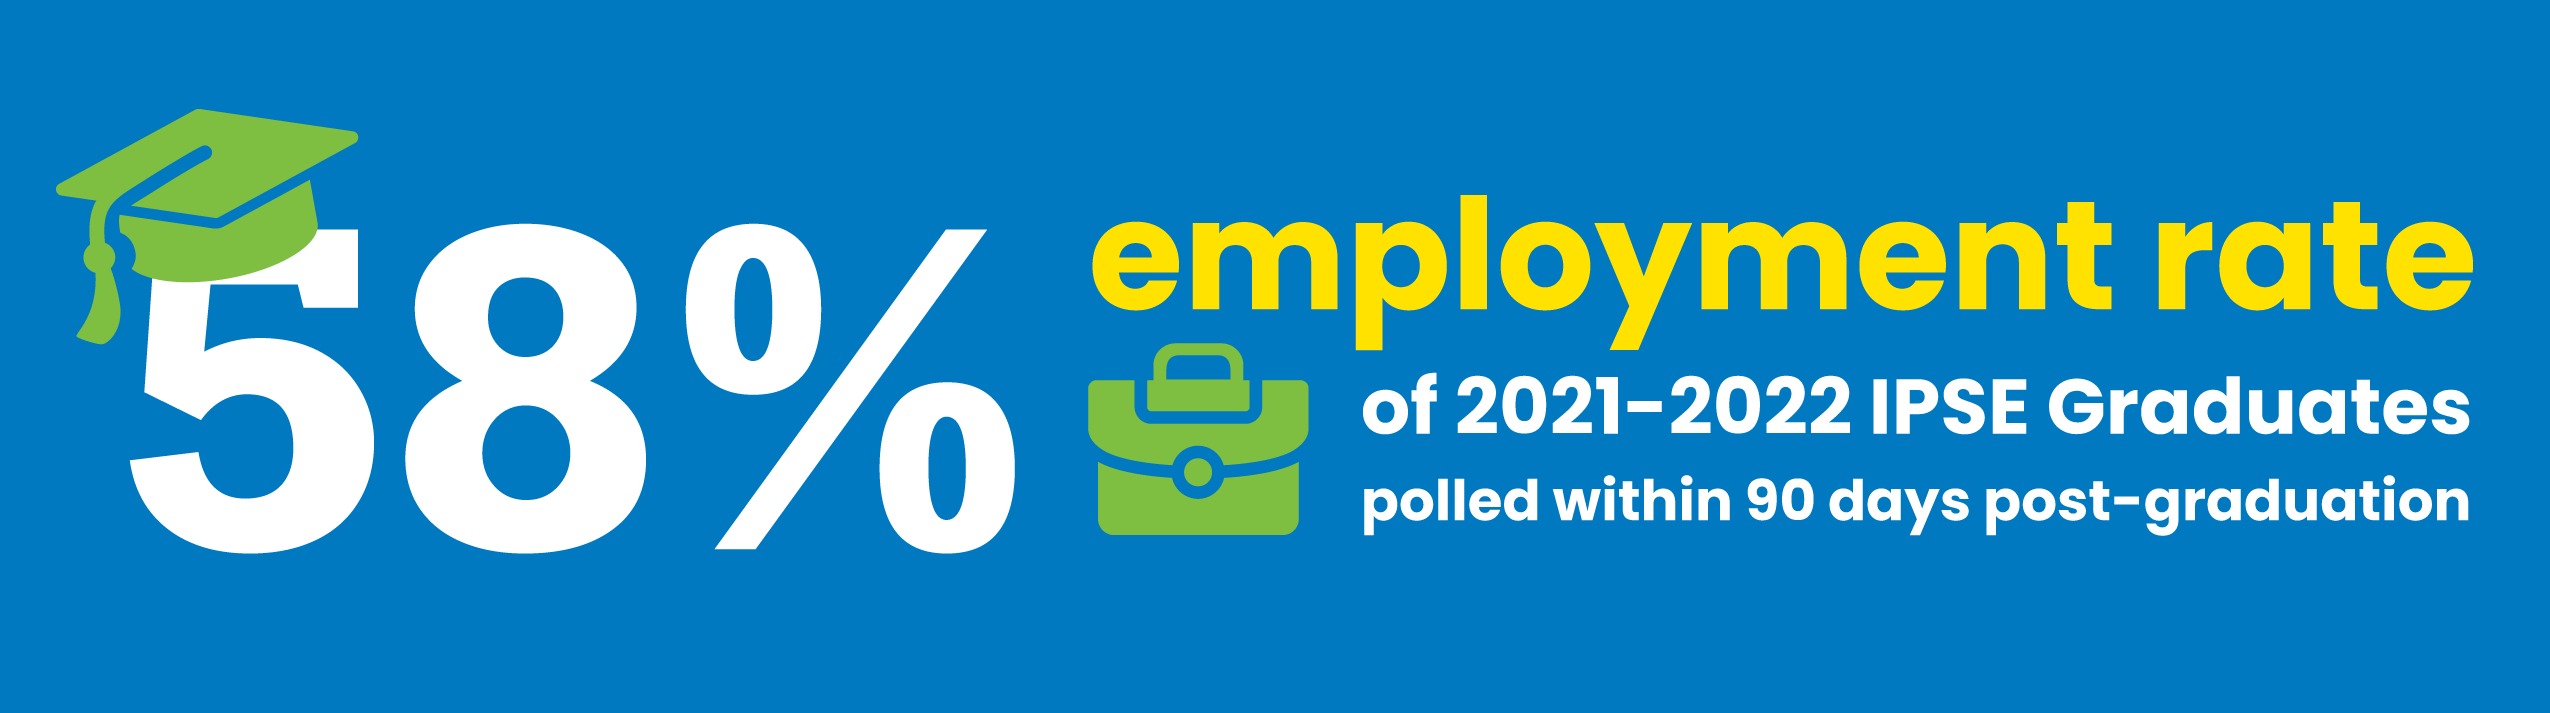 58% employment rate of 2021-2022 IPSE Graduates polled within 90 days post-graduation